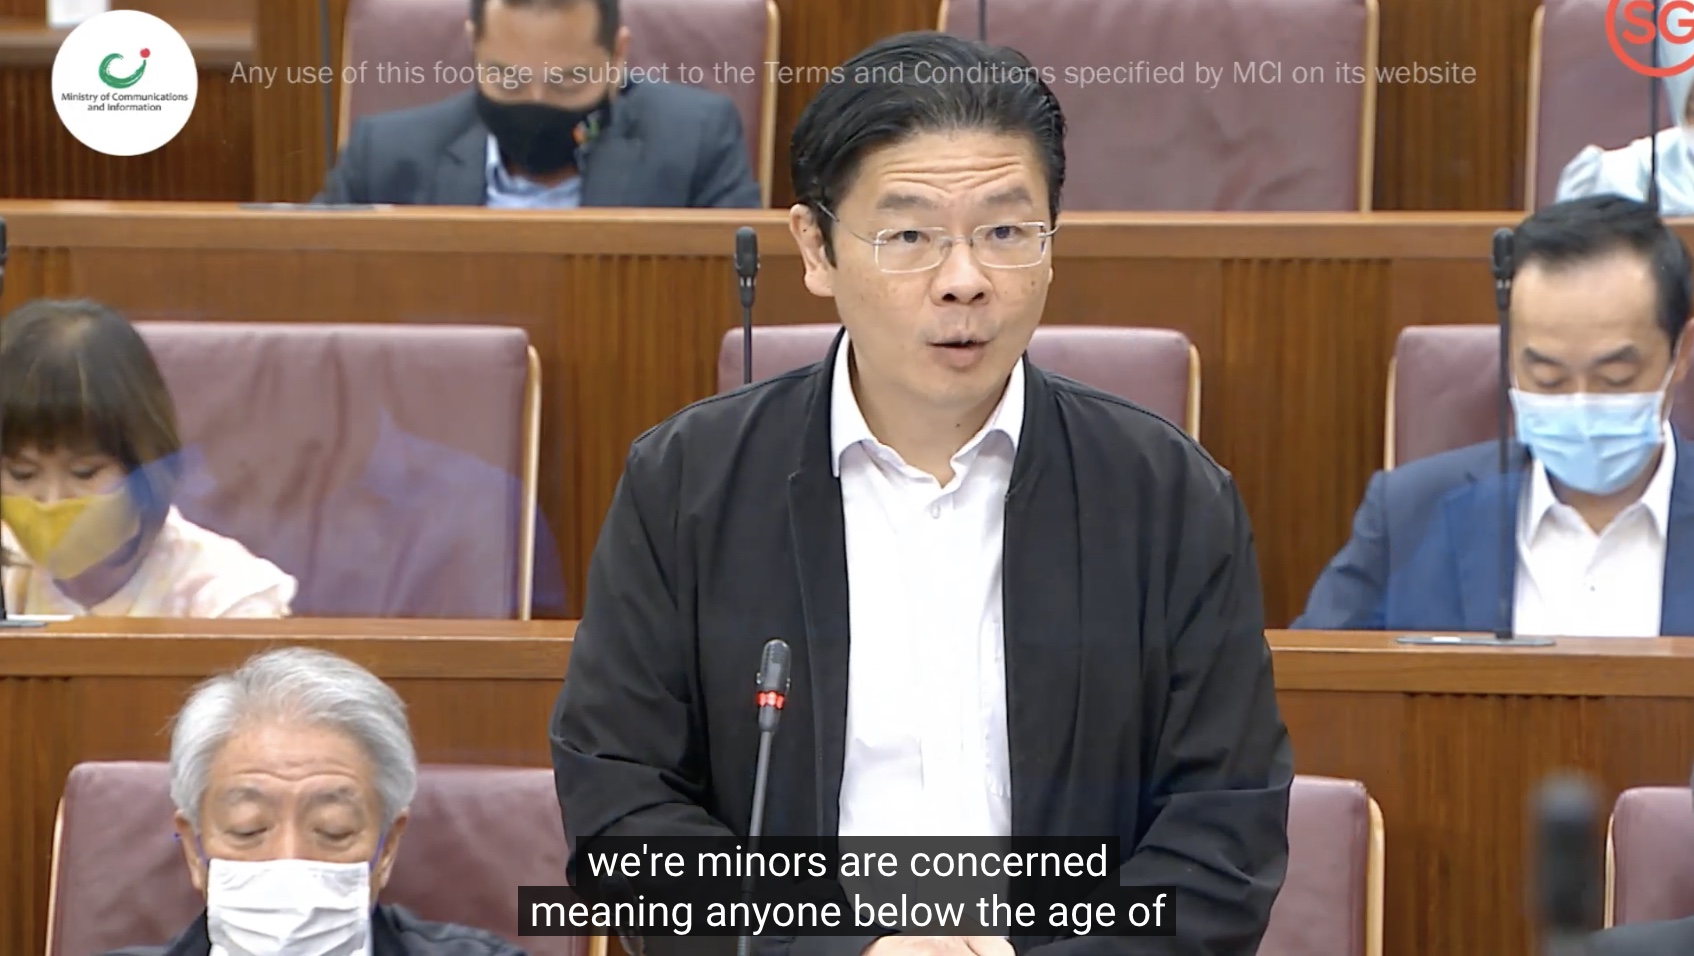 Education Minister Lawrence Wong in parliament on Feb. 1, 2020. Photo: MCI/YouTube